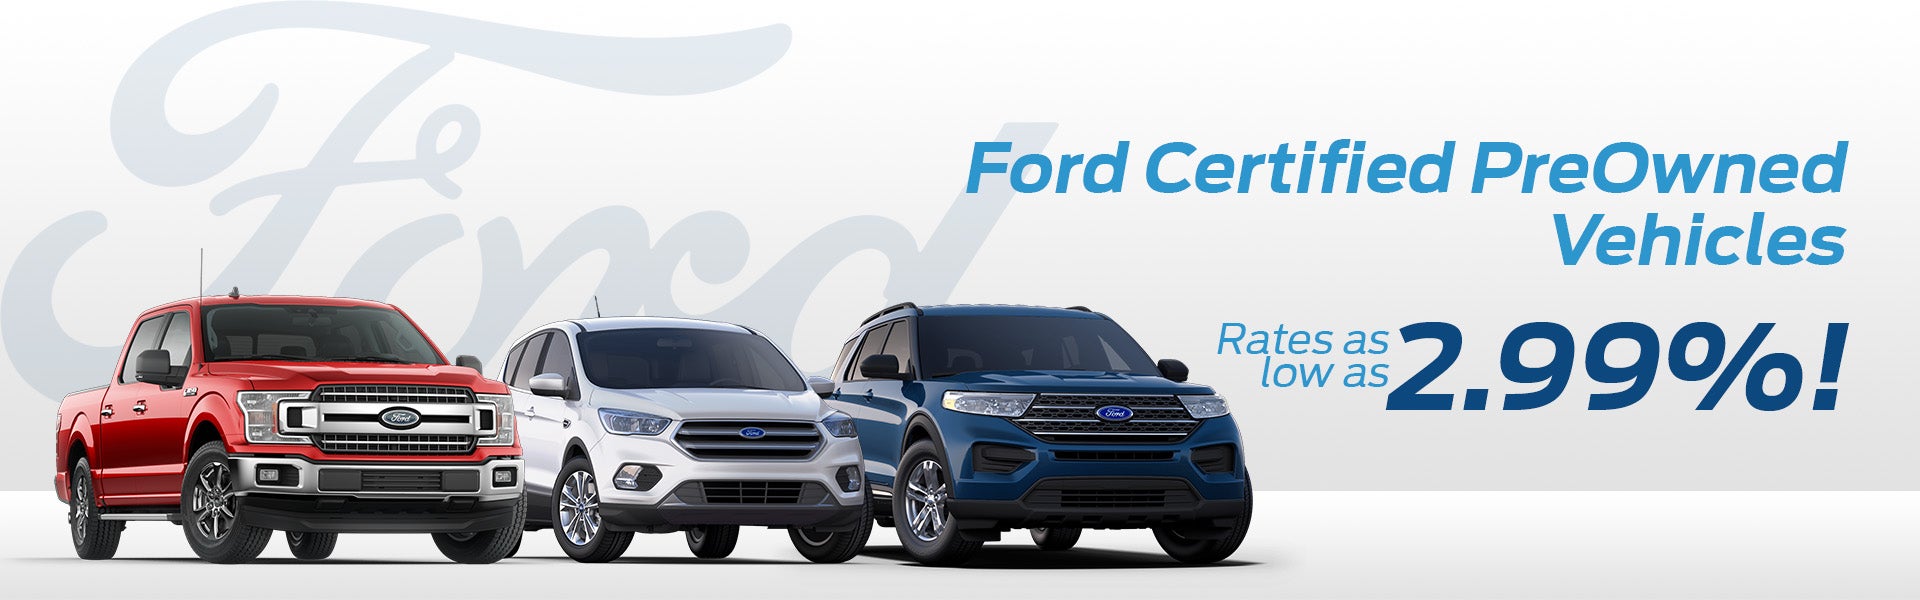 Ford CPO Vehicles as low as 1.99%!